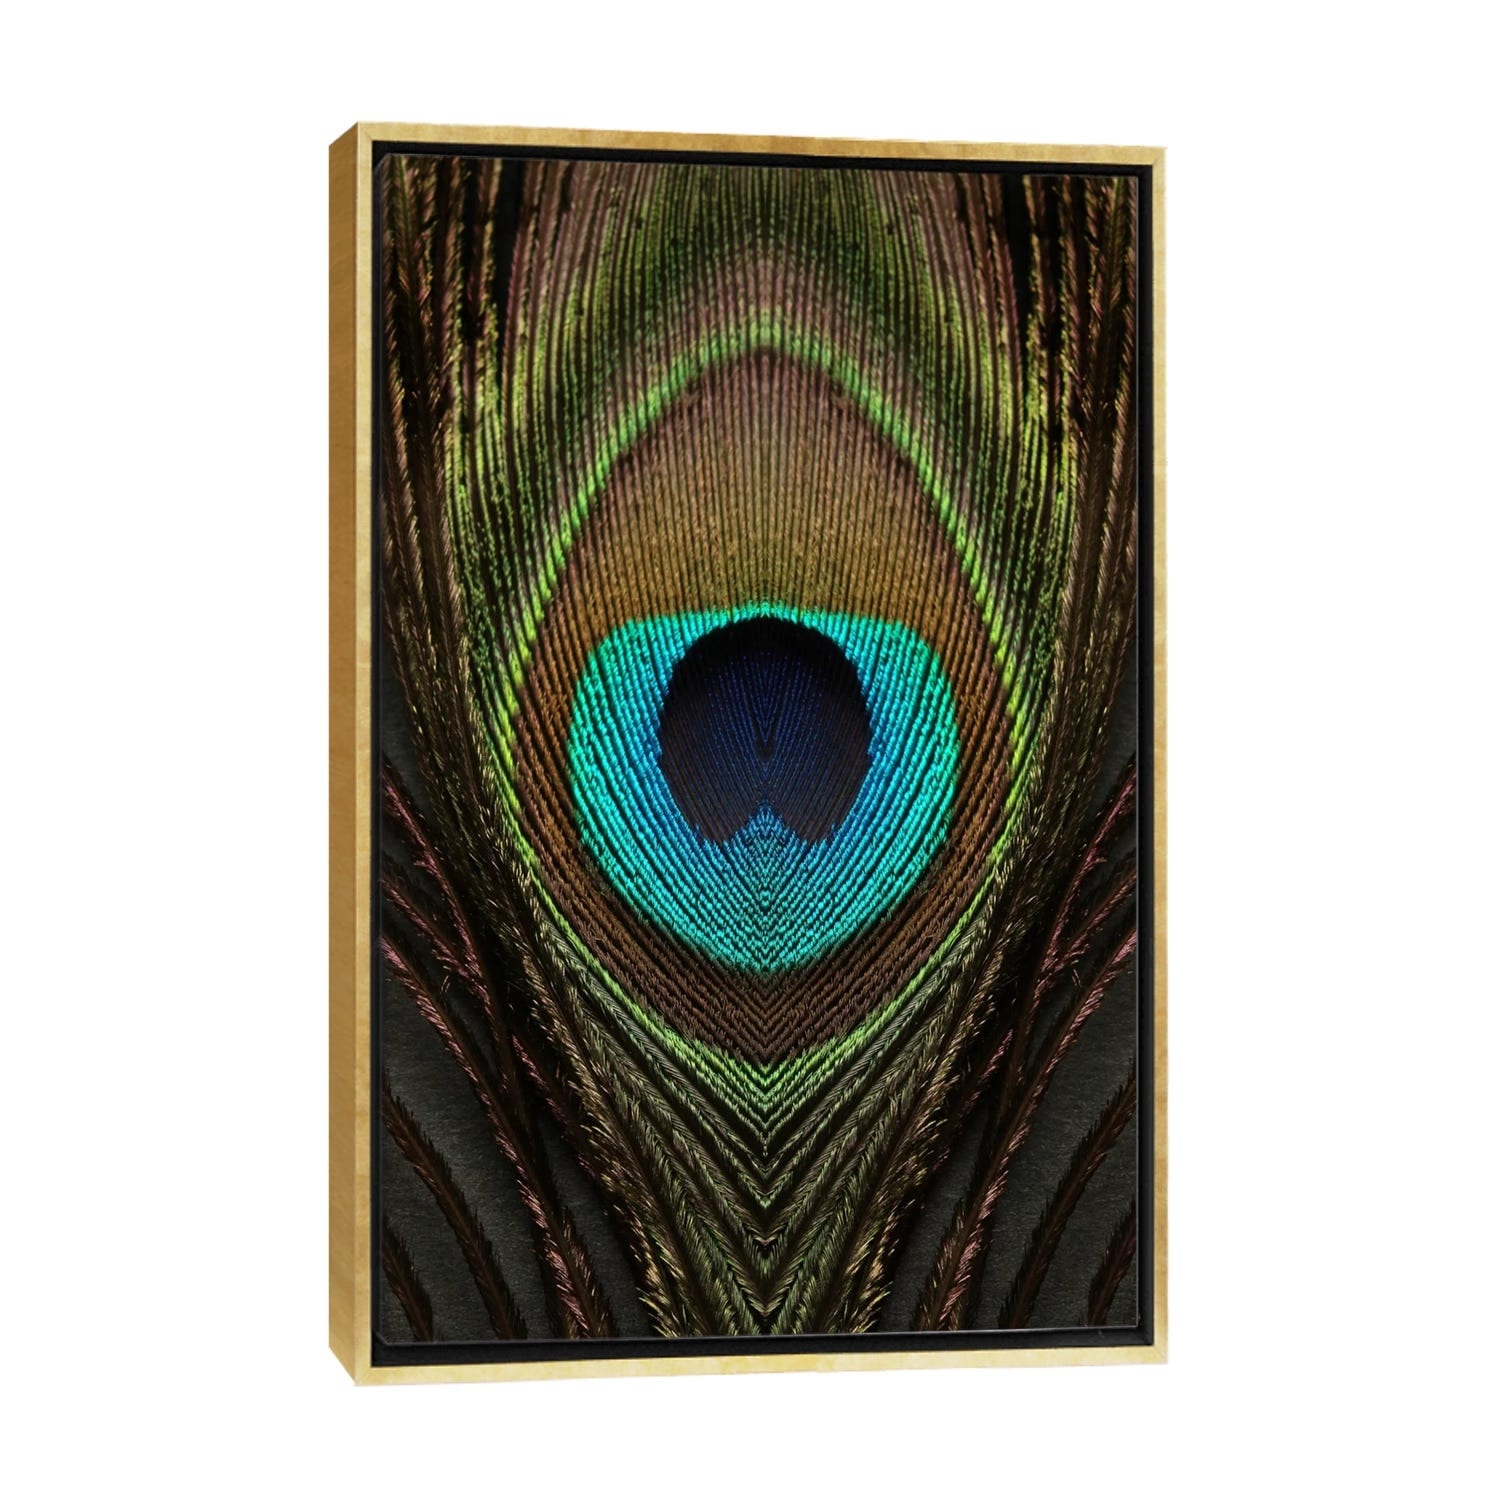 Framed Canvas Art (Gold Floating Frame) - Peacock Feather Symmetry I by Alyson Fennell ( Decorative Elements > Feathers art) - 40x26 in